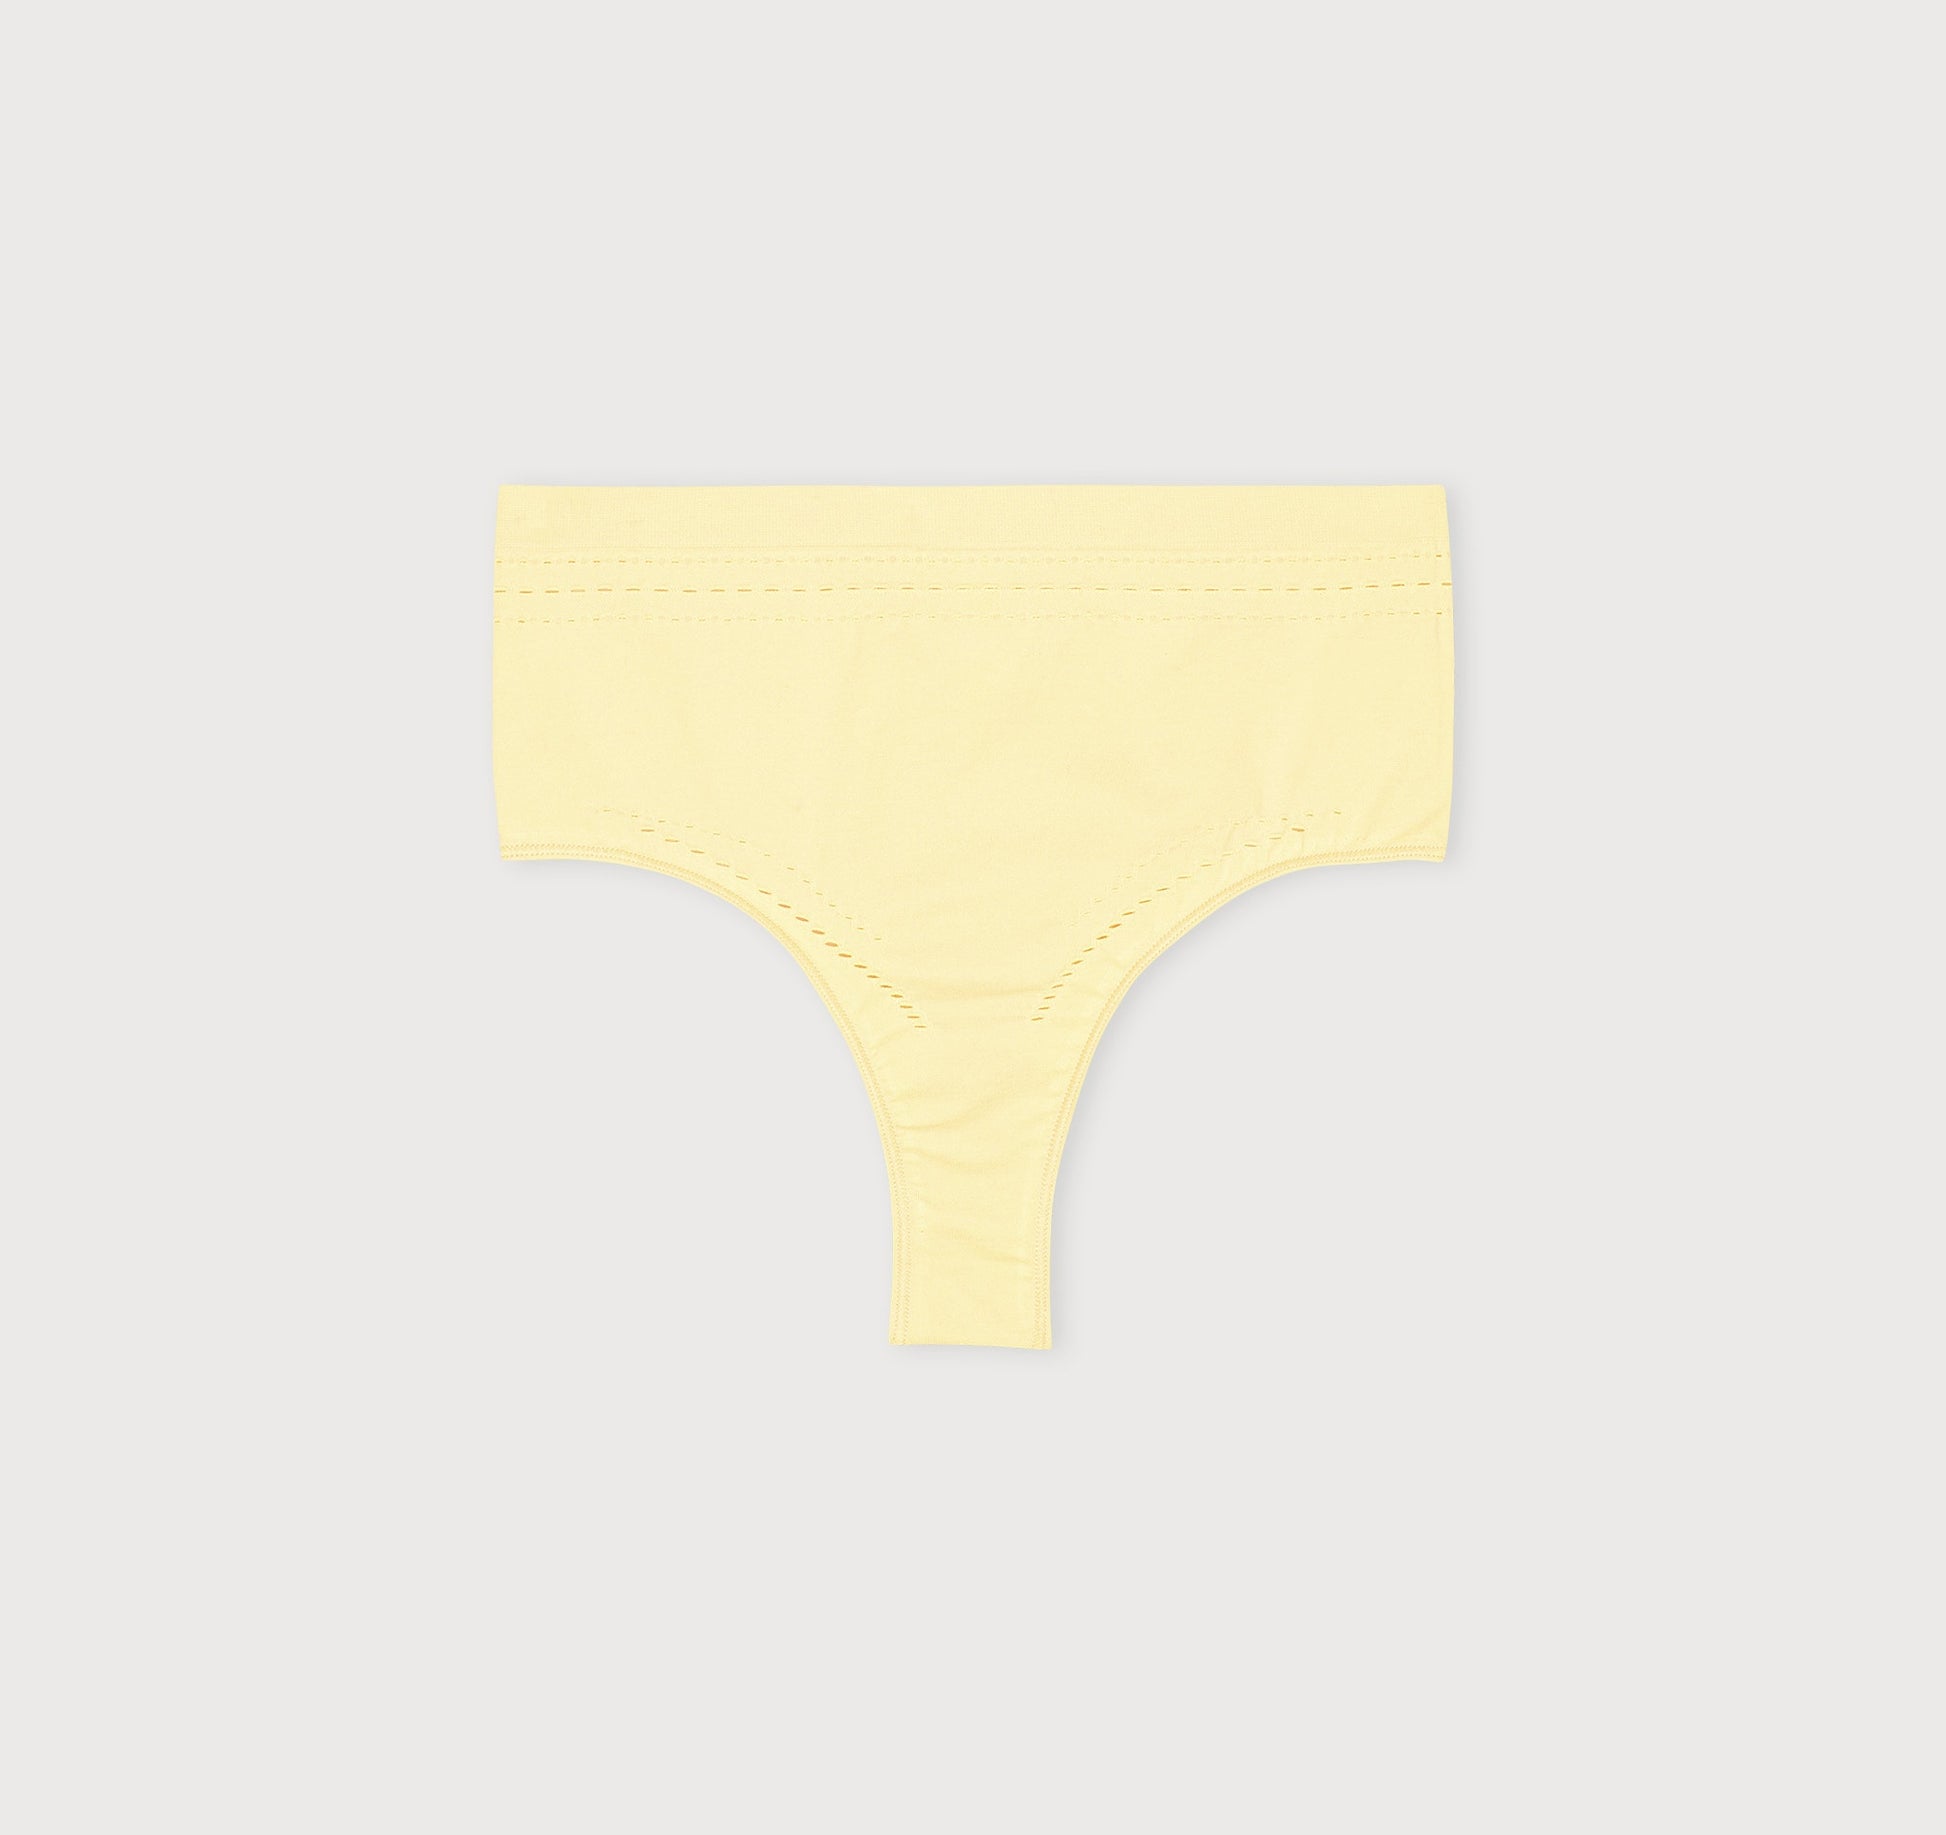 Buy Organic Cotton Seamless High-Rise Tanga, Fast Delivery